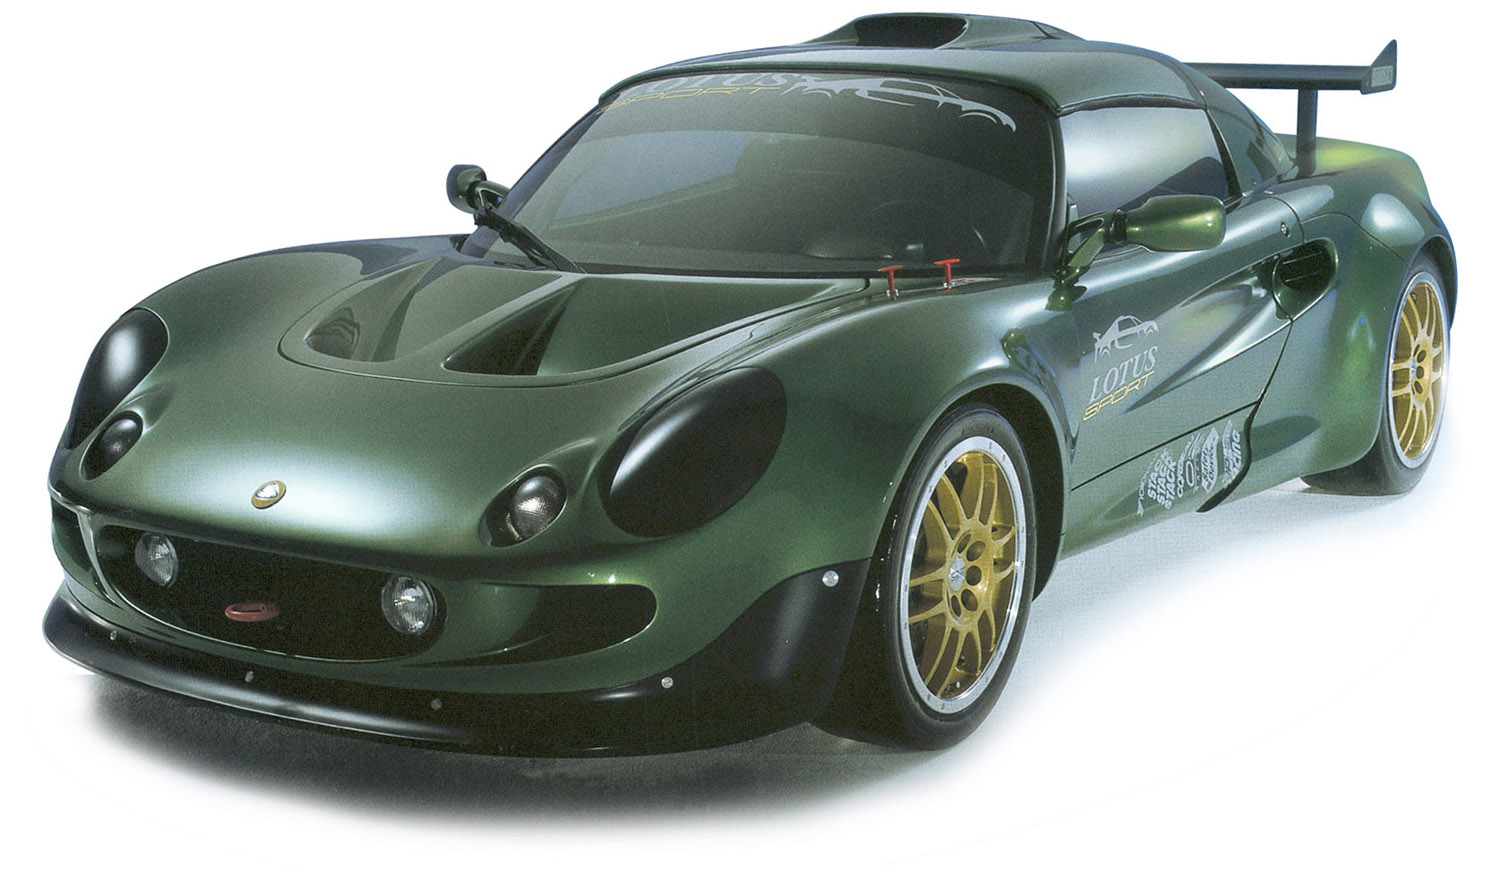 image of a Lotus Race Series Elise with Motorsport branding done by Peter Poland 1999